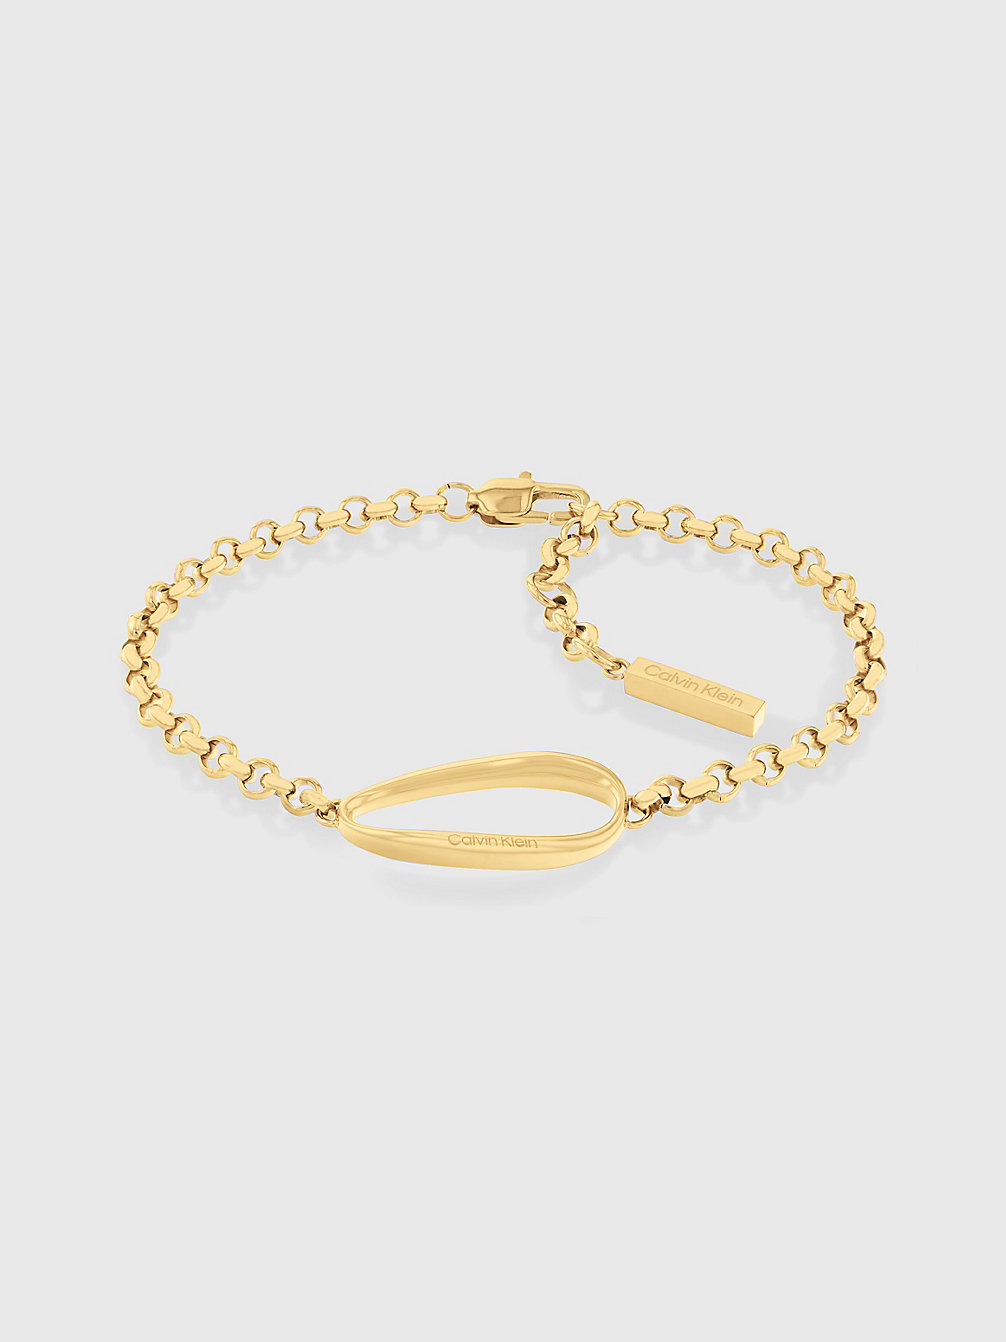 Bracciale - Playful Organic Shapes > GOLD > undefined donna > Calvin Klein